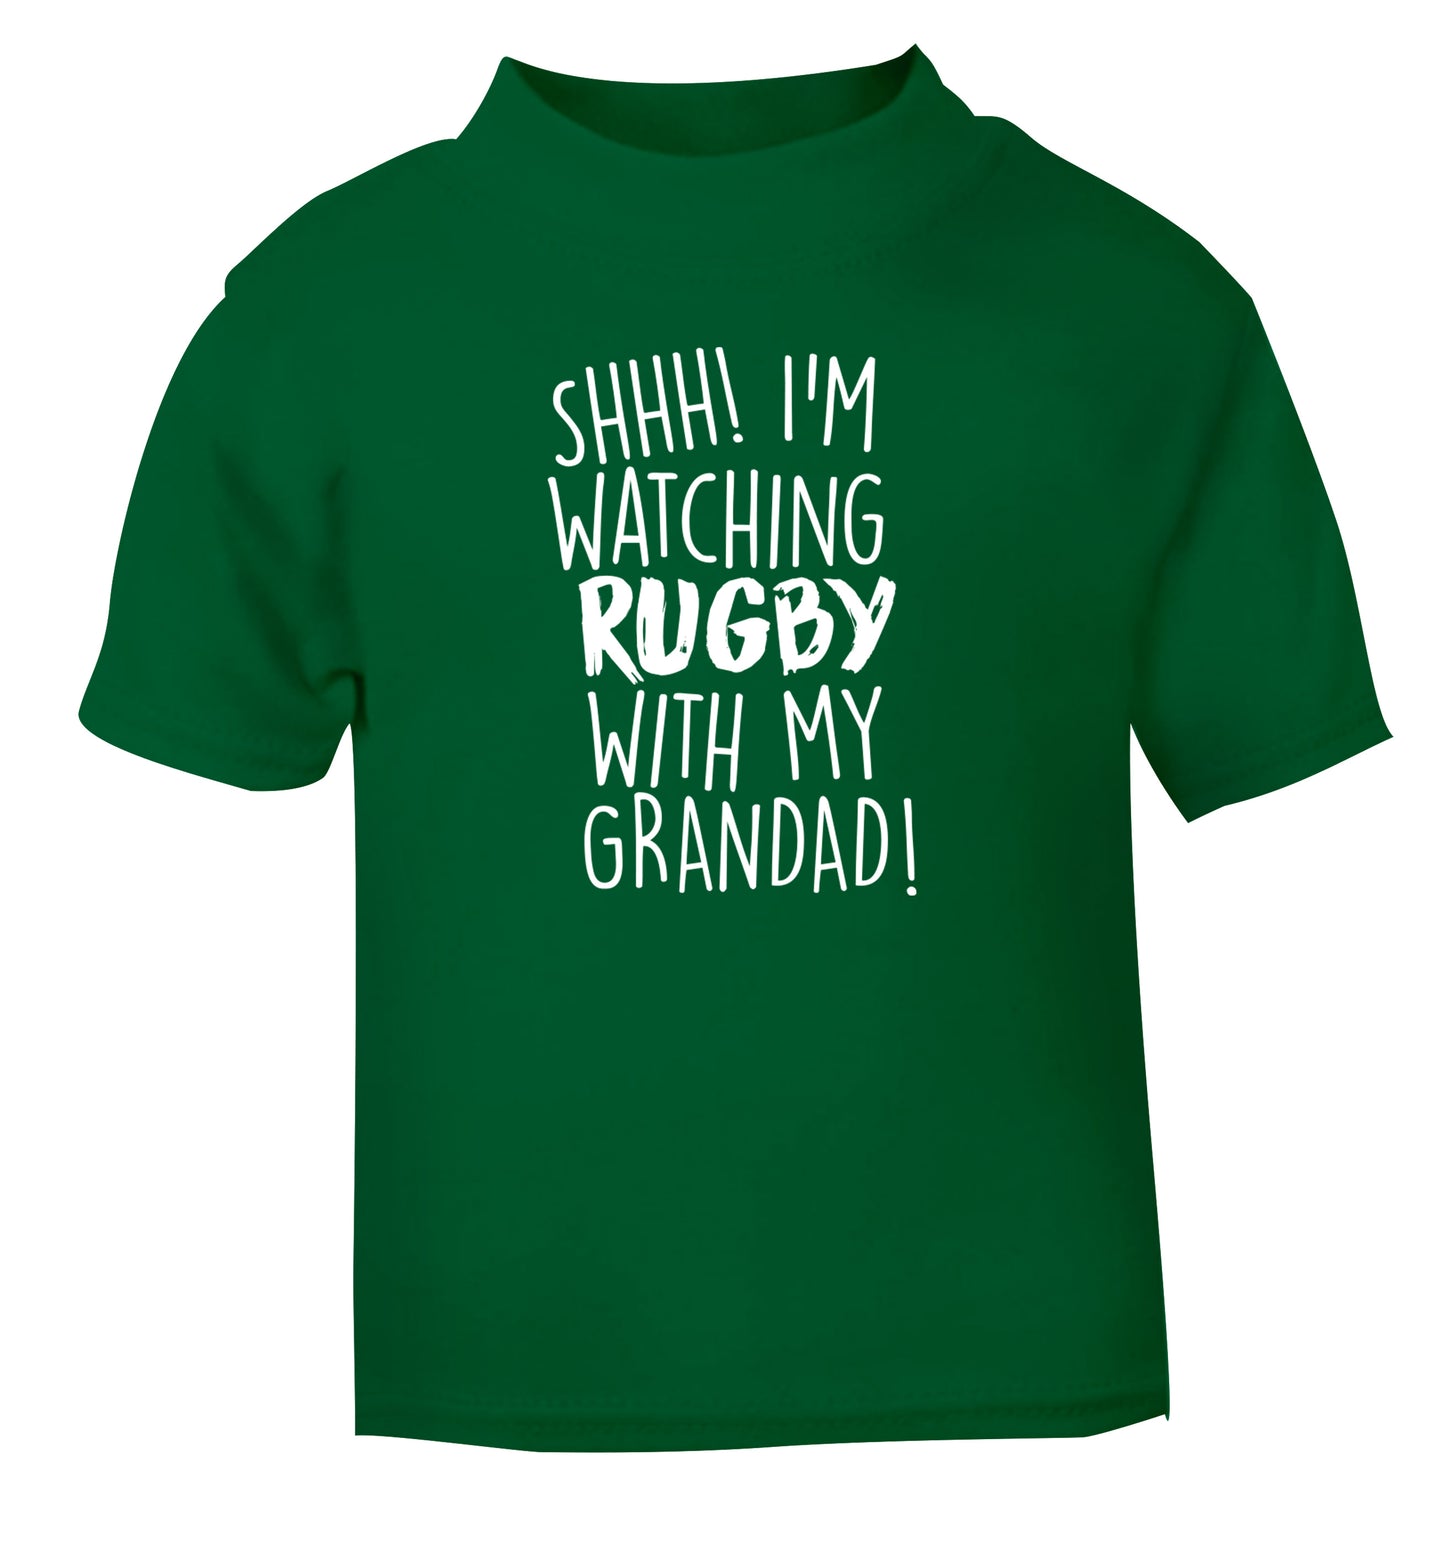 Shh I'm watching rugby with my grandad green Baby Toddler Tshirt 2 Years